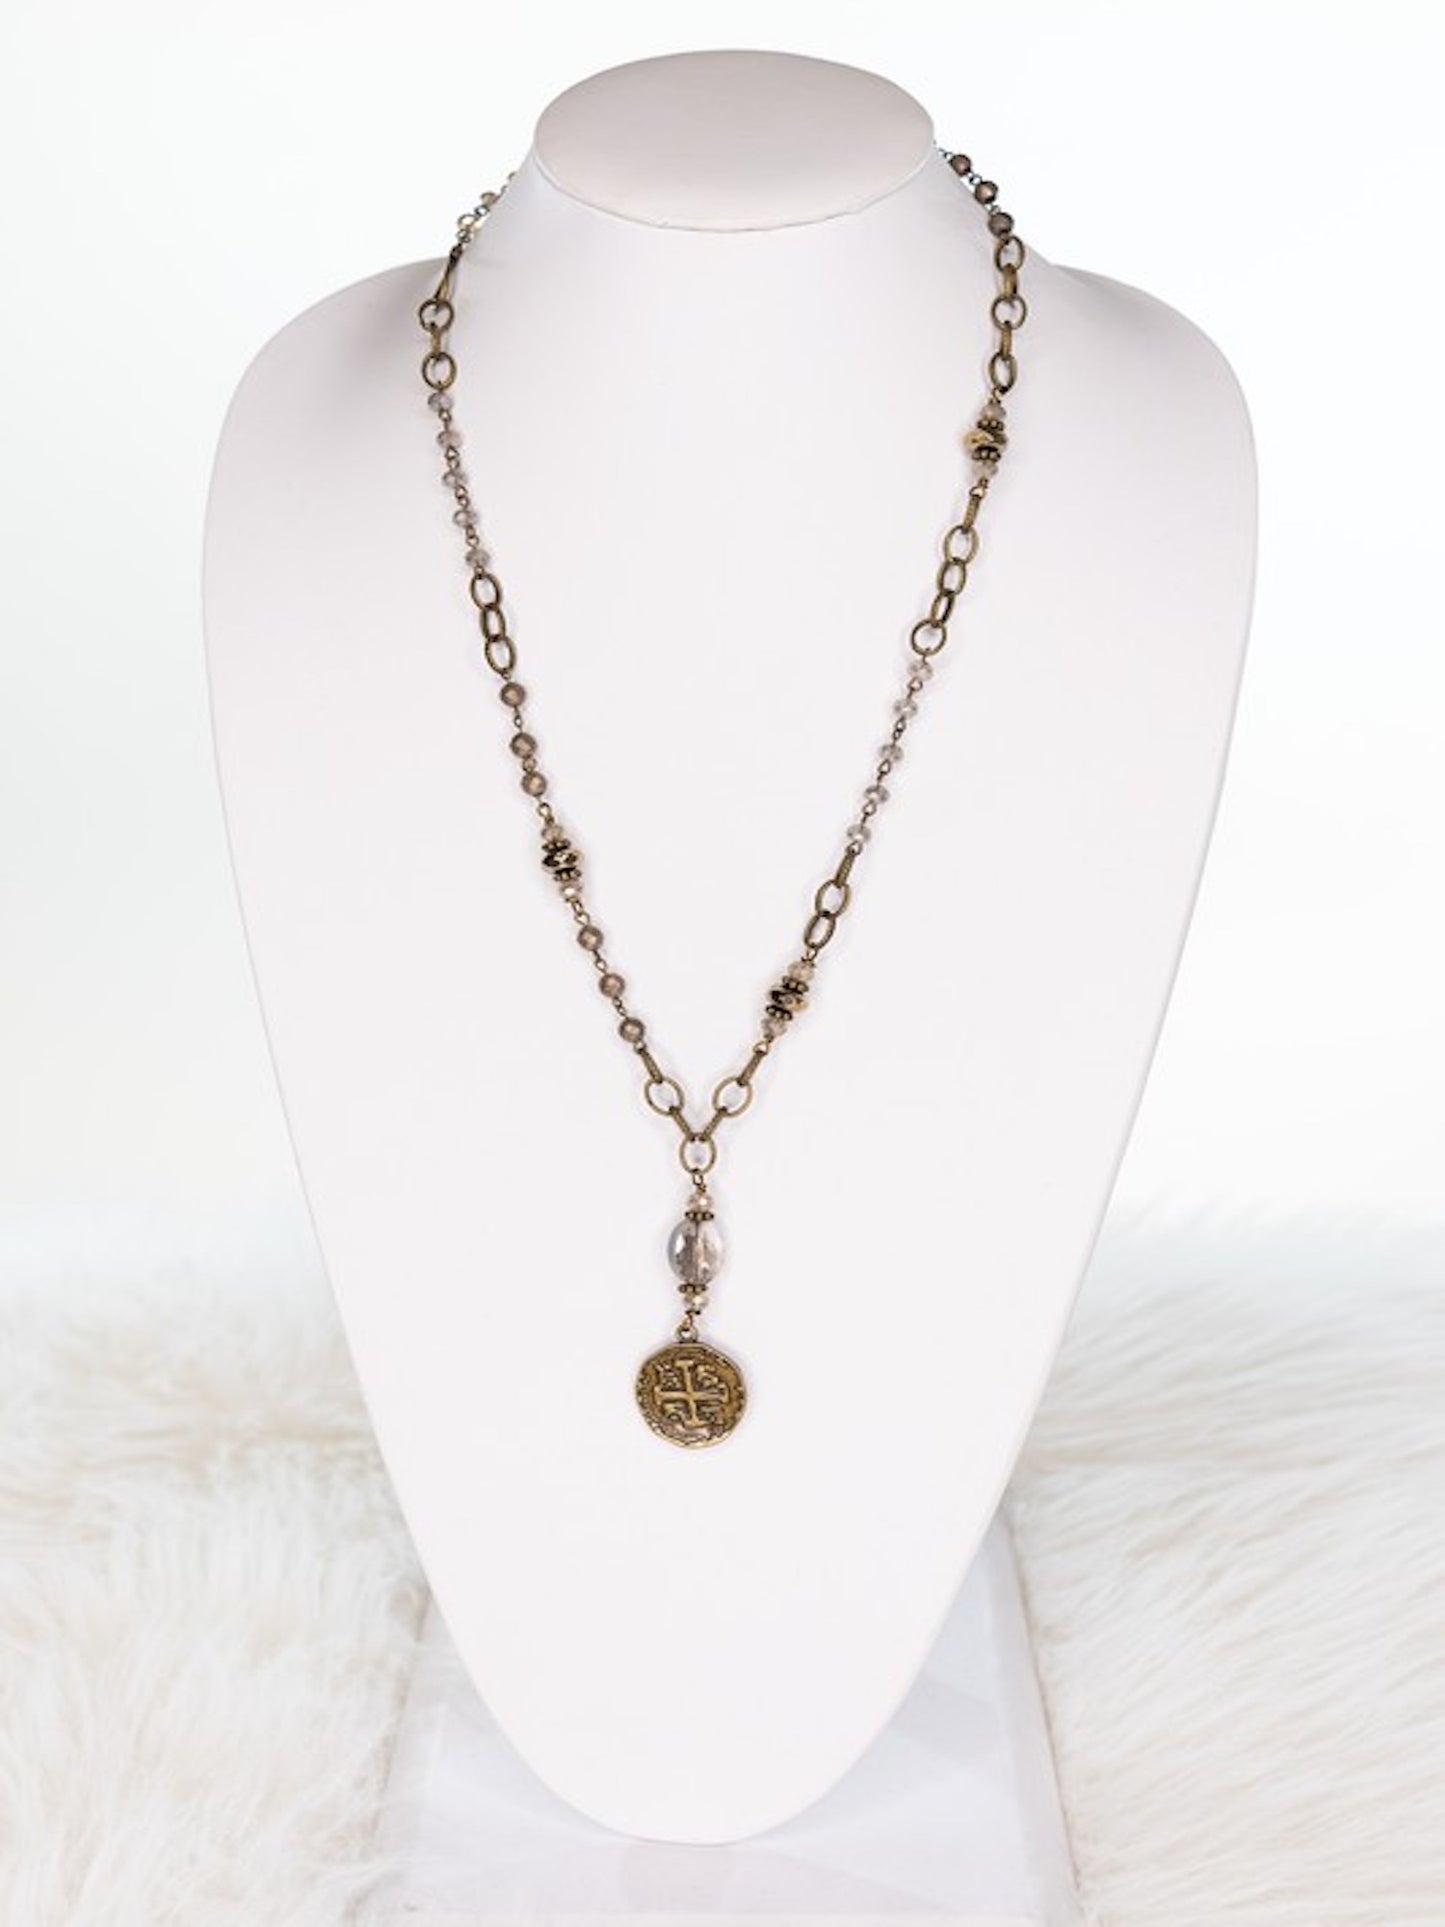 The Tracie Necklace